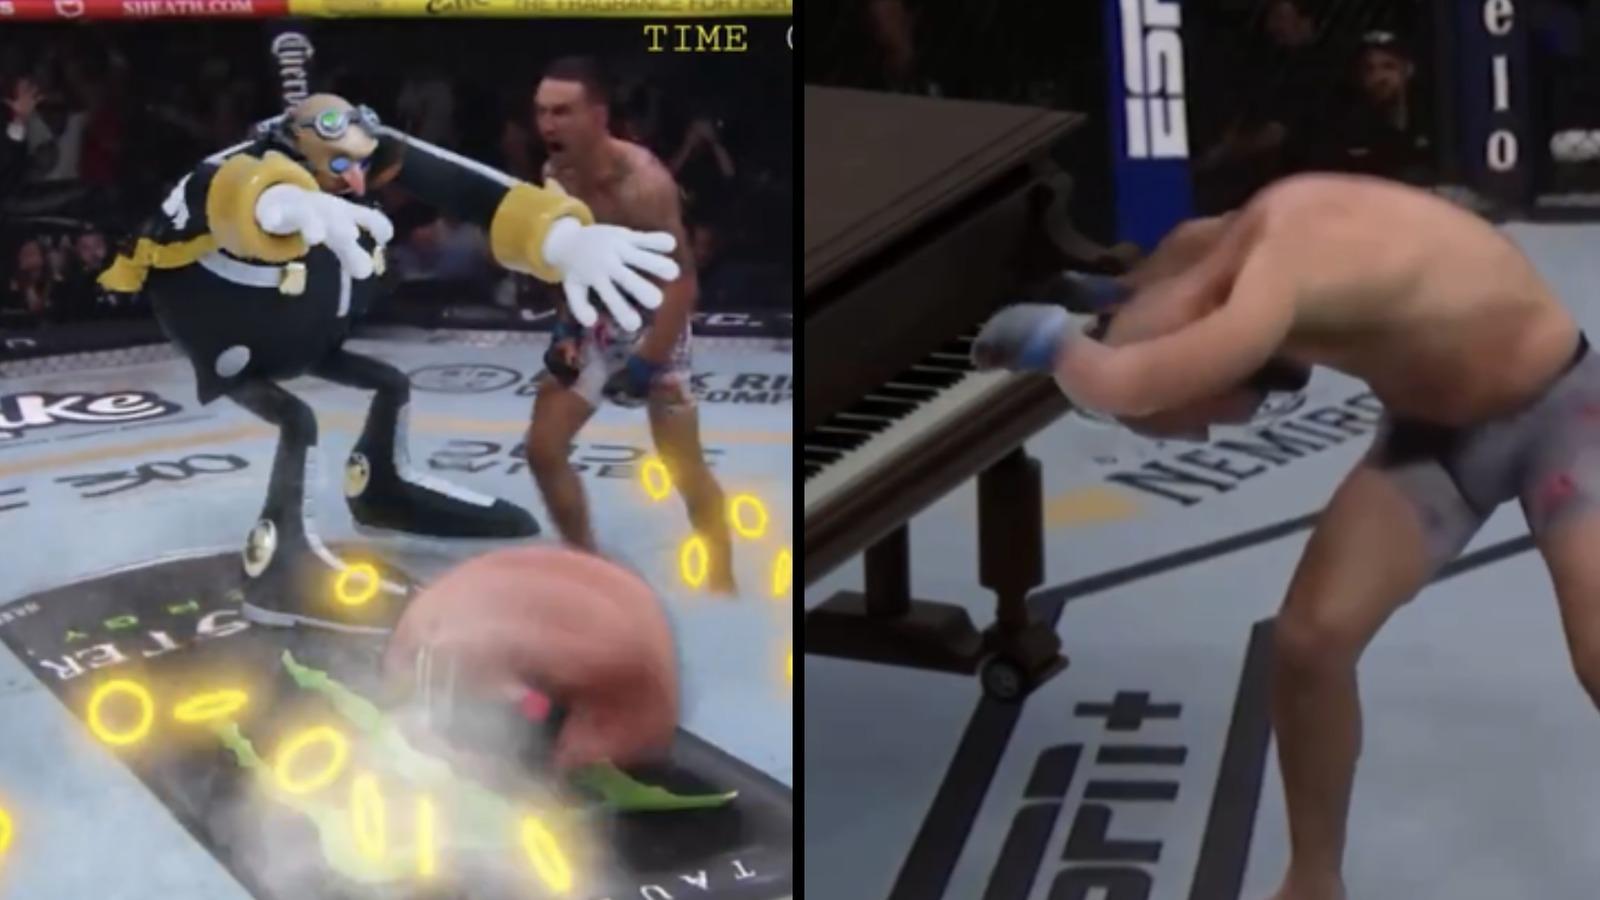 MMA edits have taken social media by storm as fans put a comical touch on some brutal knockouts